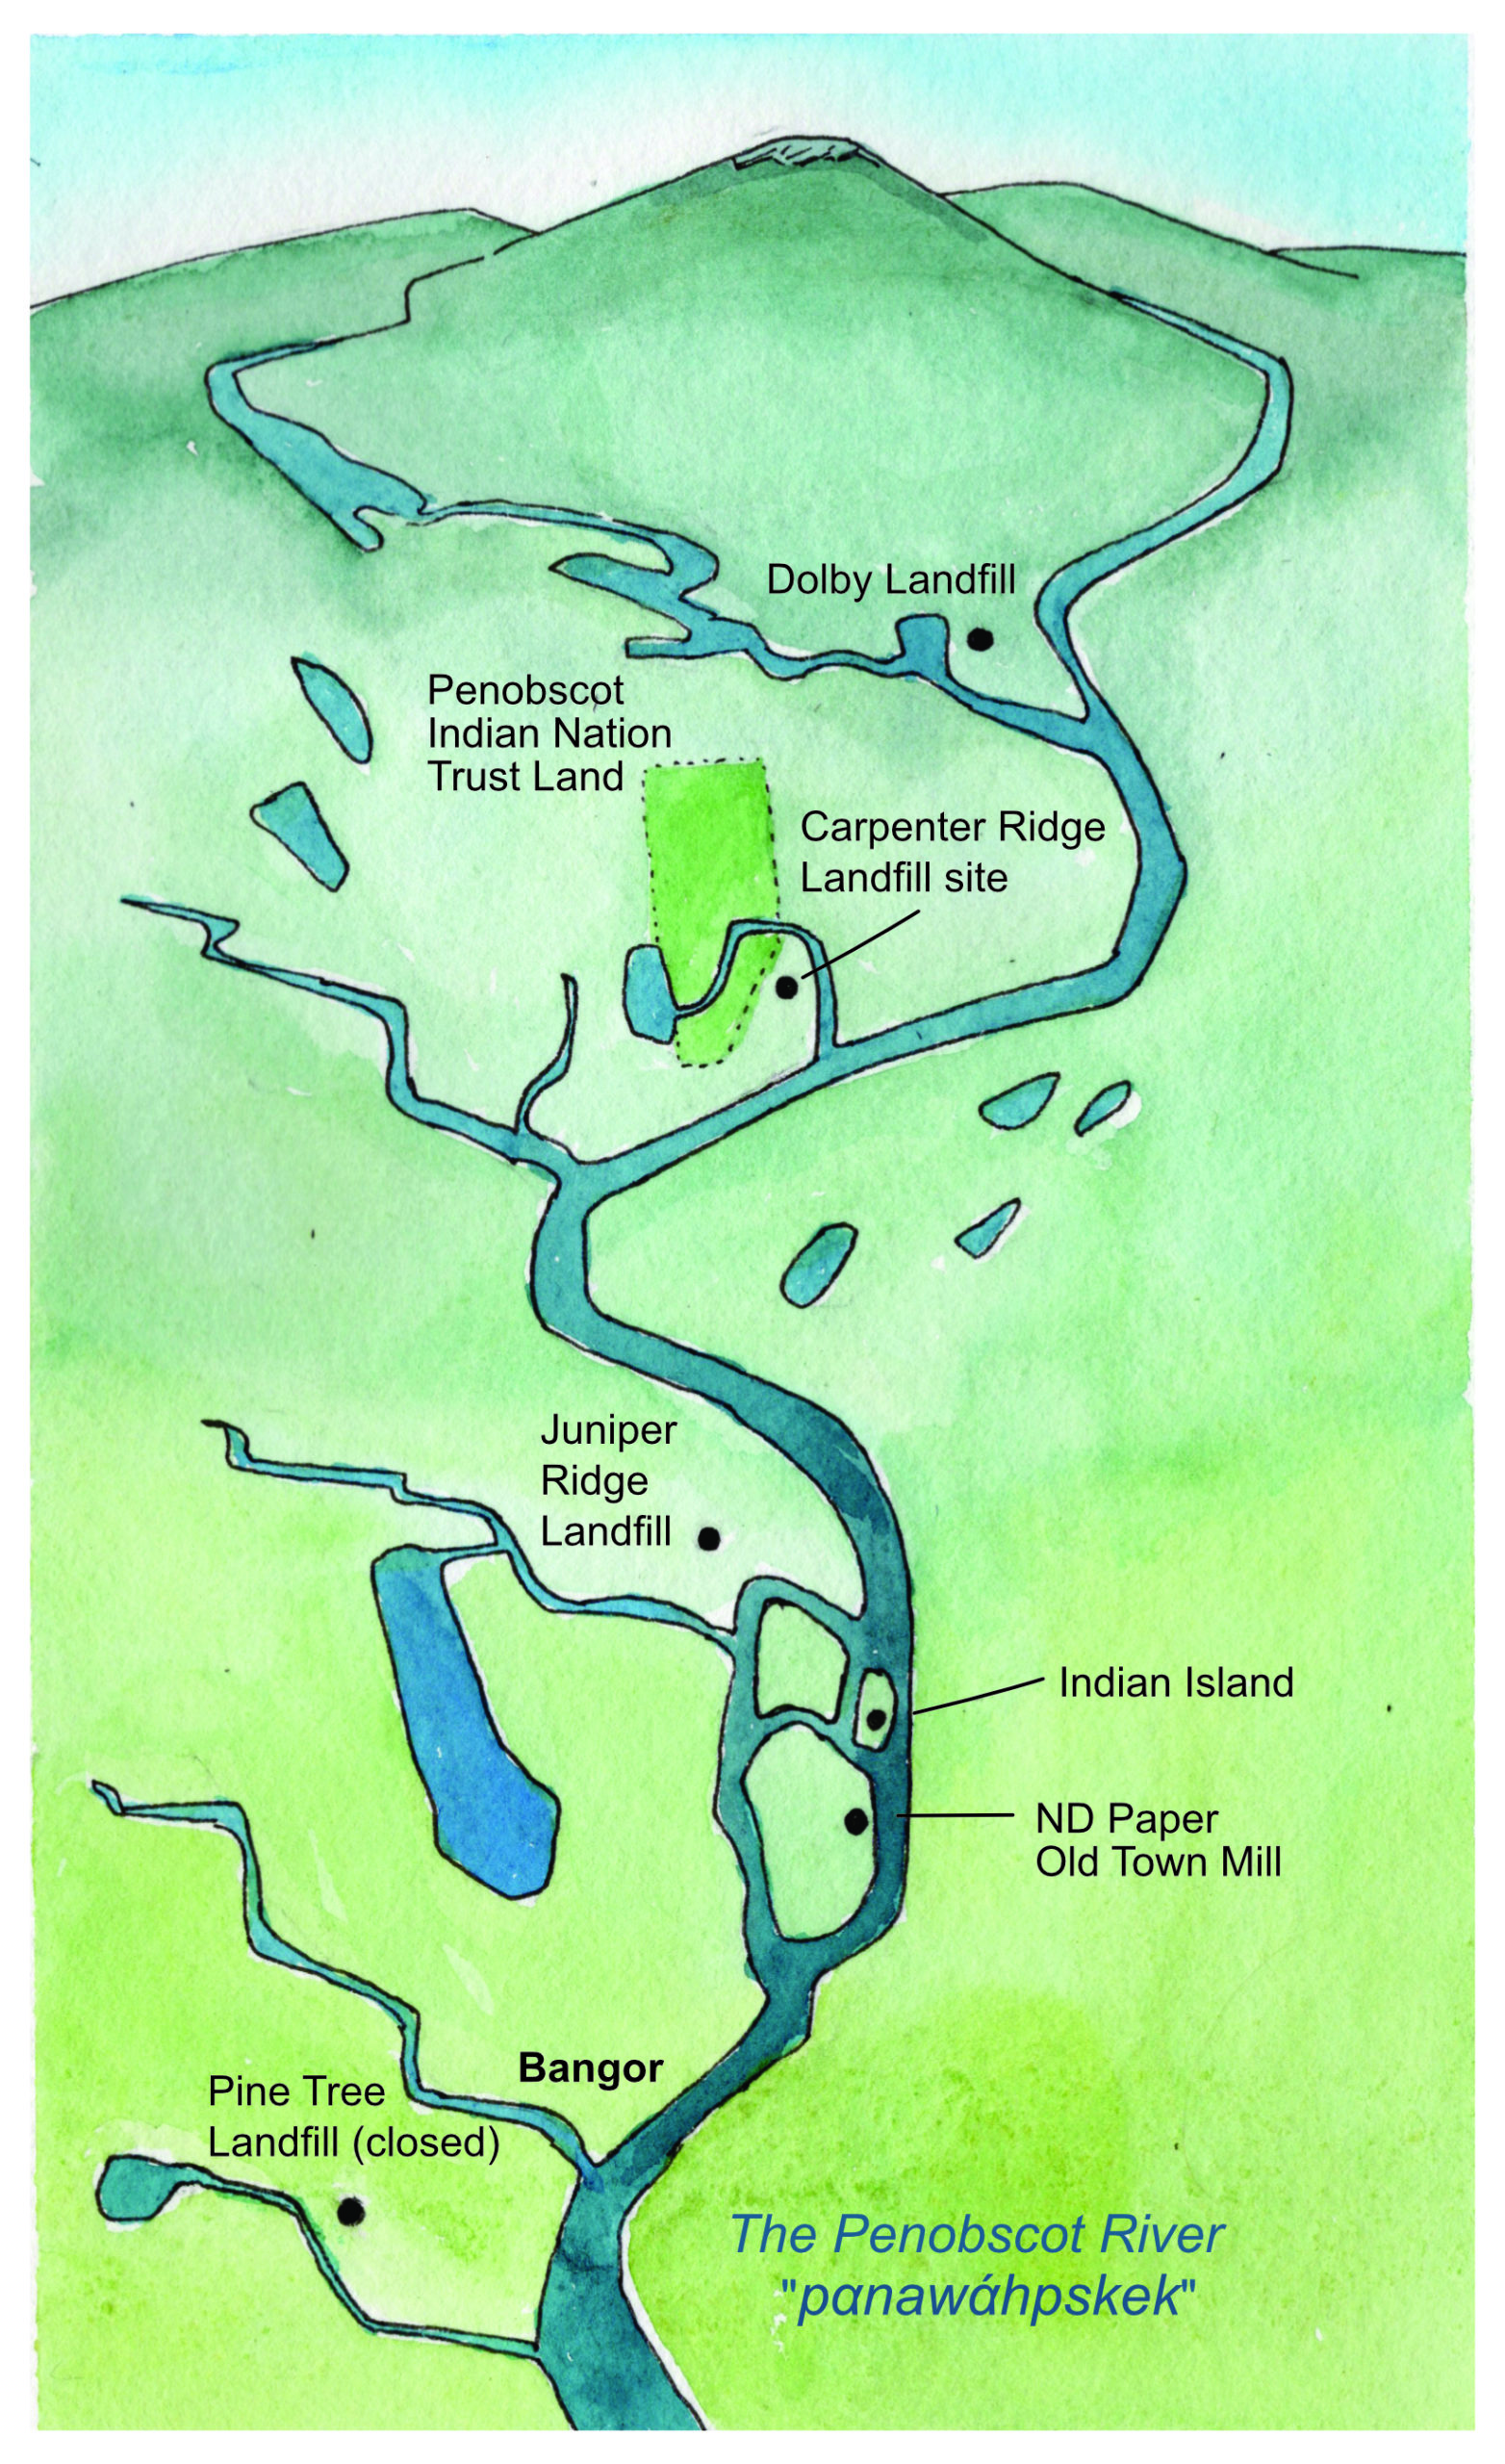 Map of the Penobscot River area